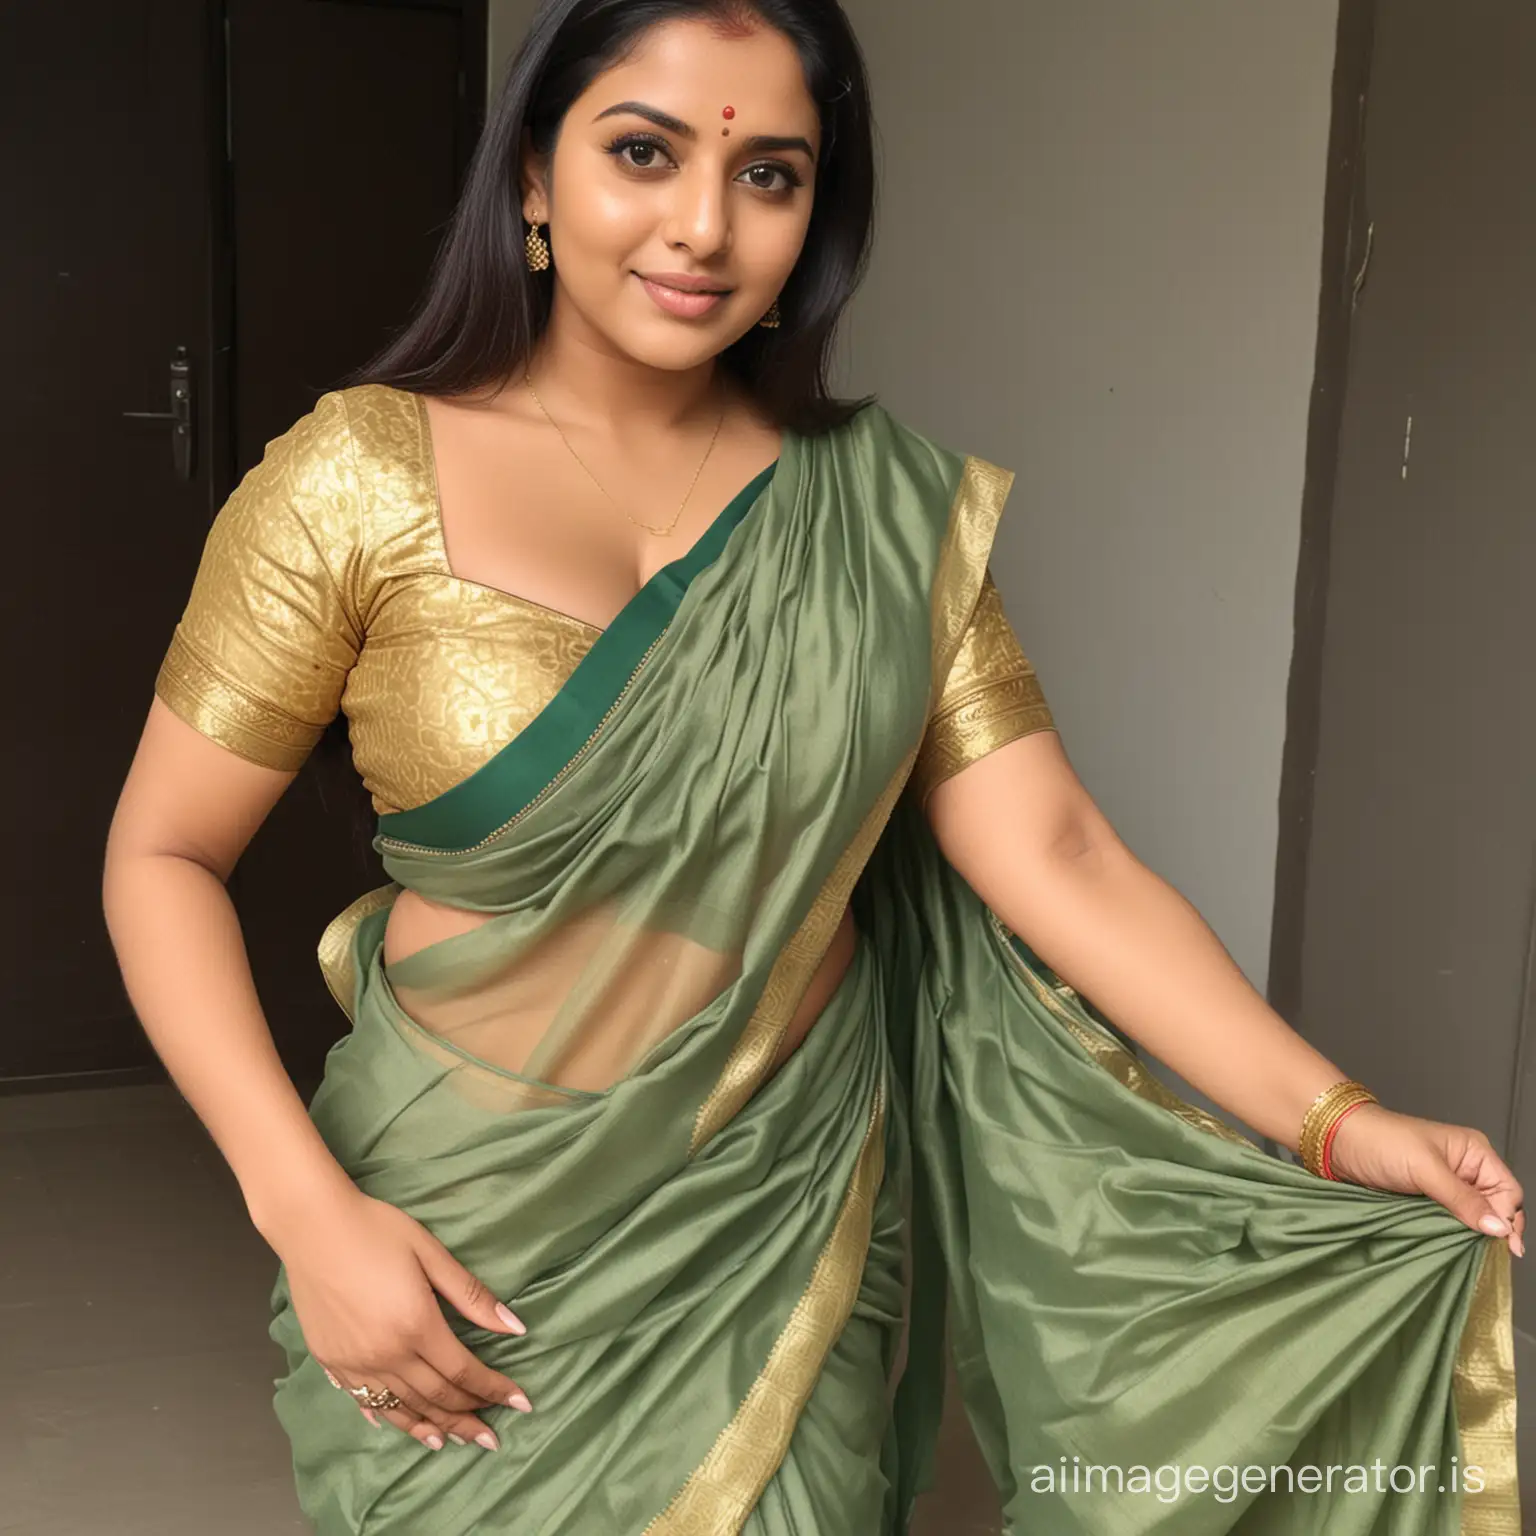 Beautiful-Woman-in-Traditional-Saree-with-Emphasized-Physique